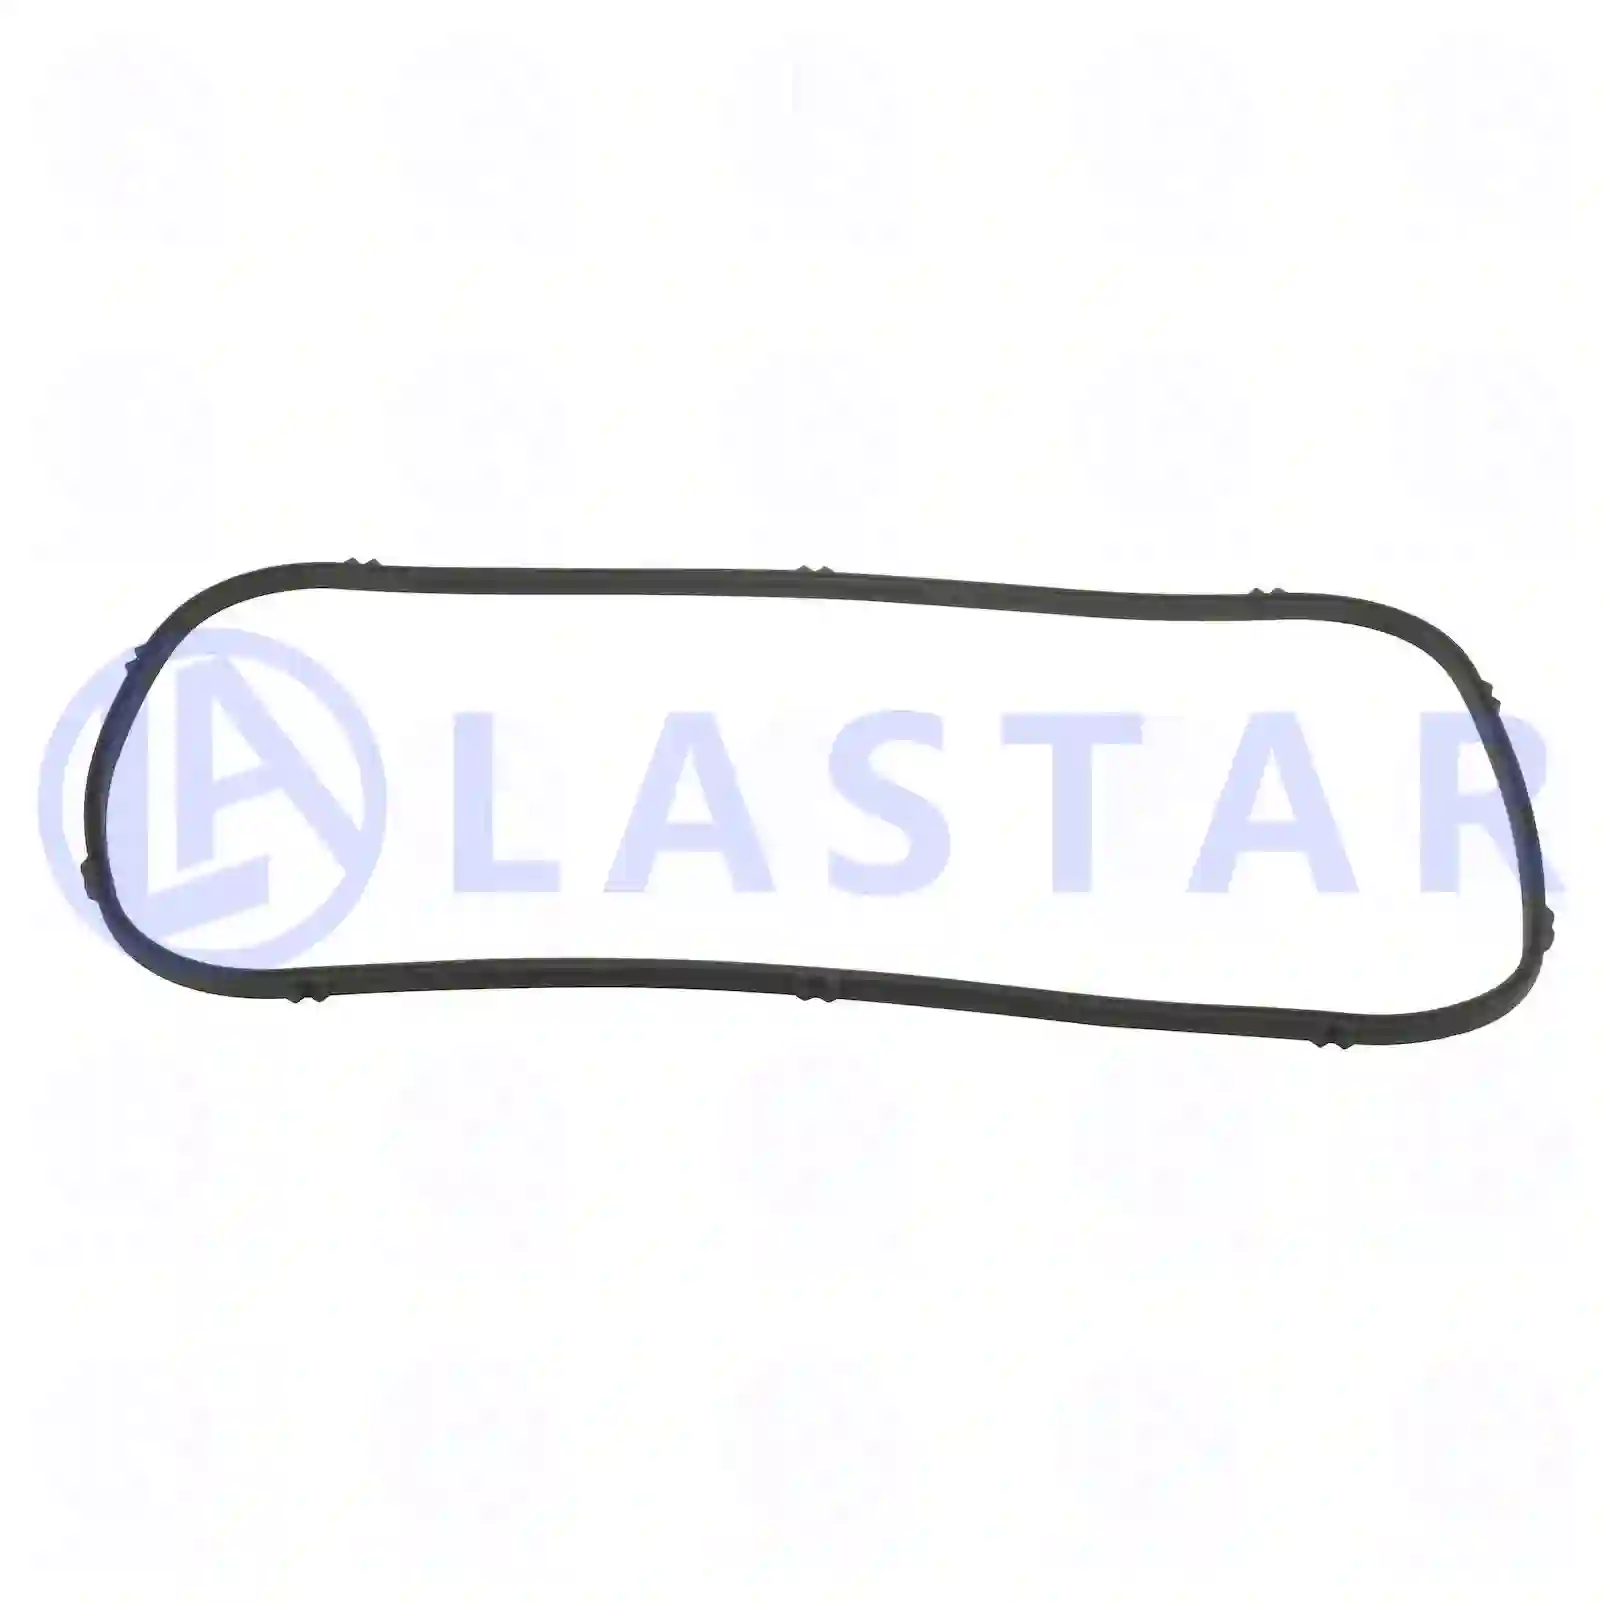 Gasket, side cover, 77700259, 467409, 469823 ||  77700259 Lastar Spare Part | Truck Spare Parts, Auotomotive Spare Parts Gasket, side cover, 77700259, 467409, 469823 ||  77700259 Lastar Spare Part | Truck Spare Parts, Auotomotive Spare Parts